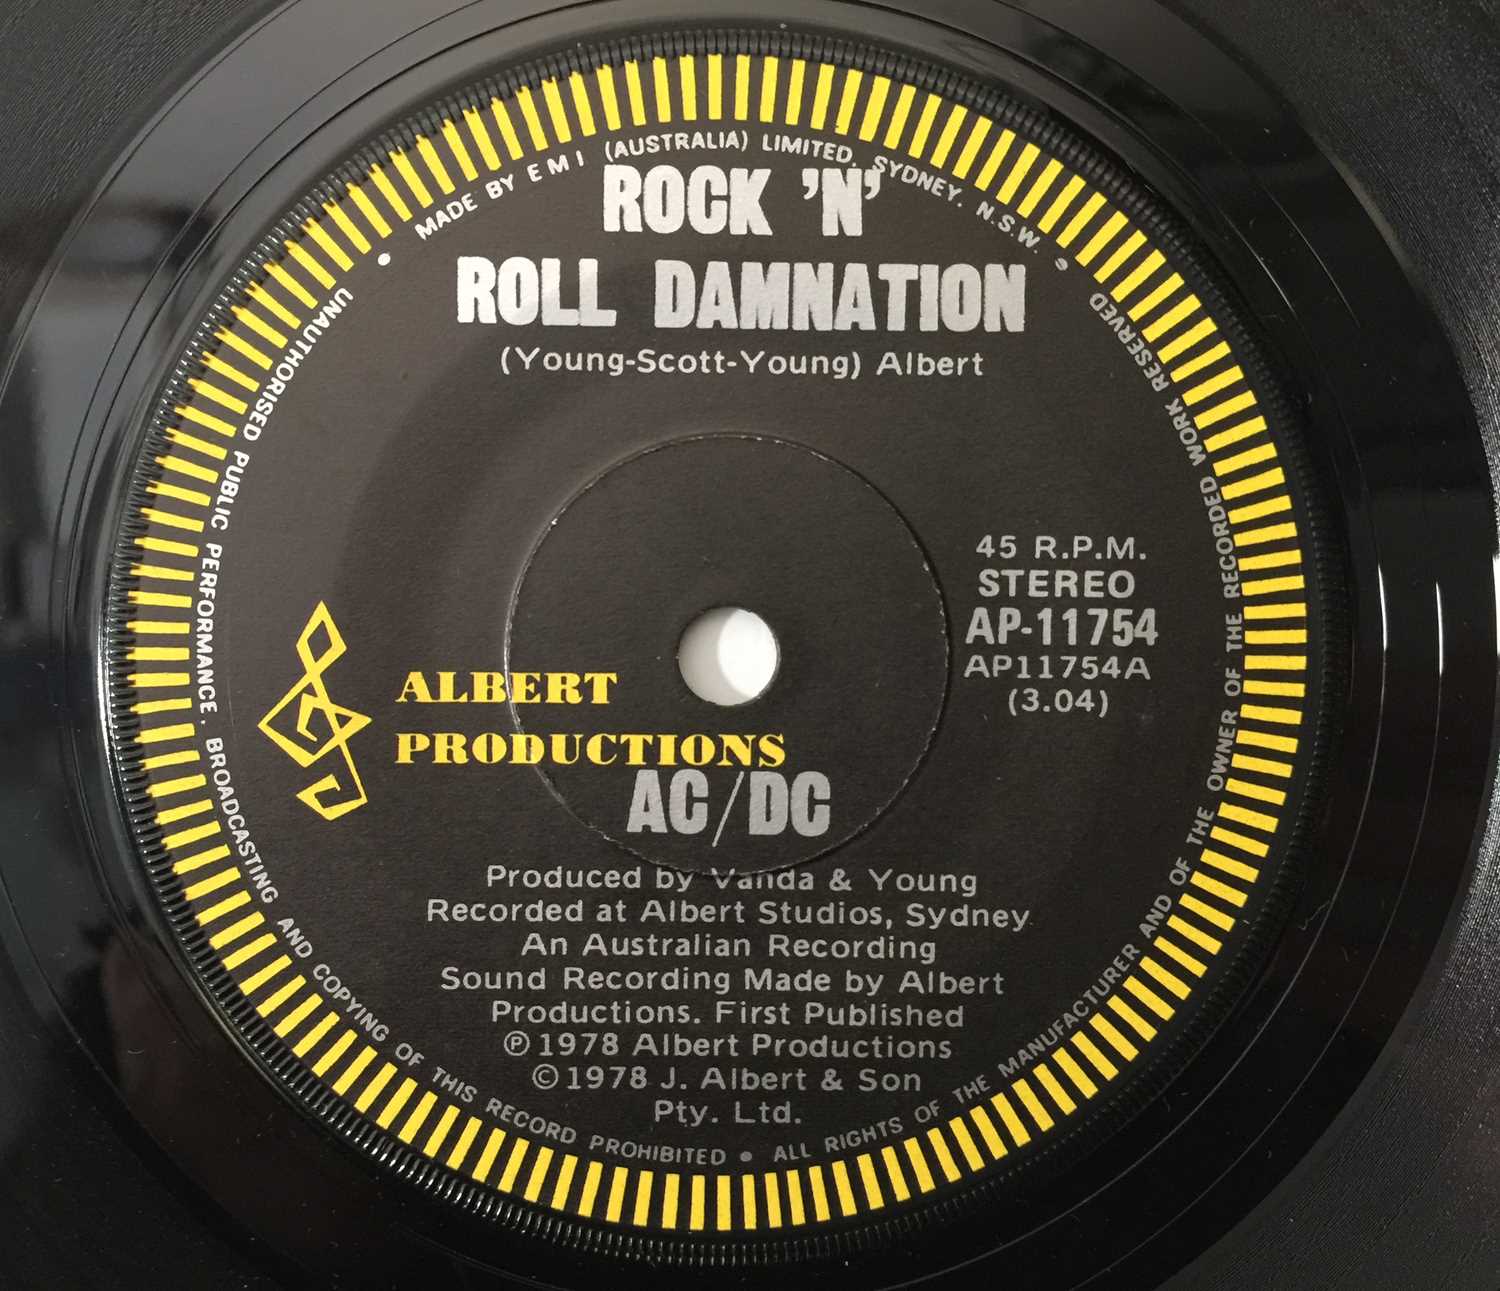 AC/DC - ROCK N ROLL DAMNATION/ COLD HEARTED MAN 7" (AUSTRALIAN - AP-11754) - Image 2 of 3